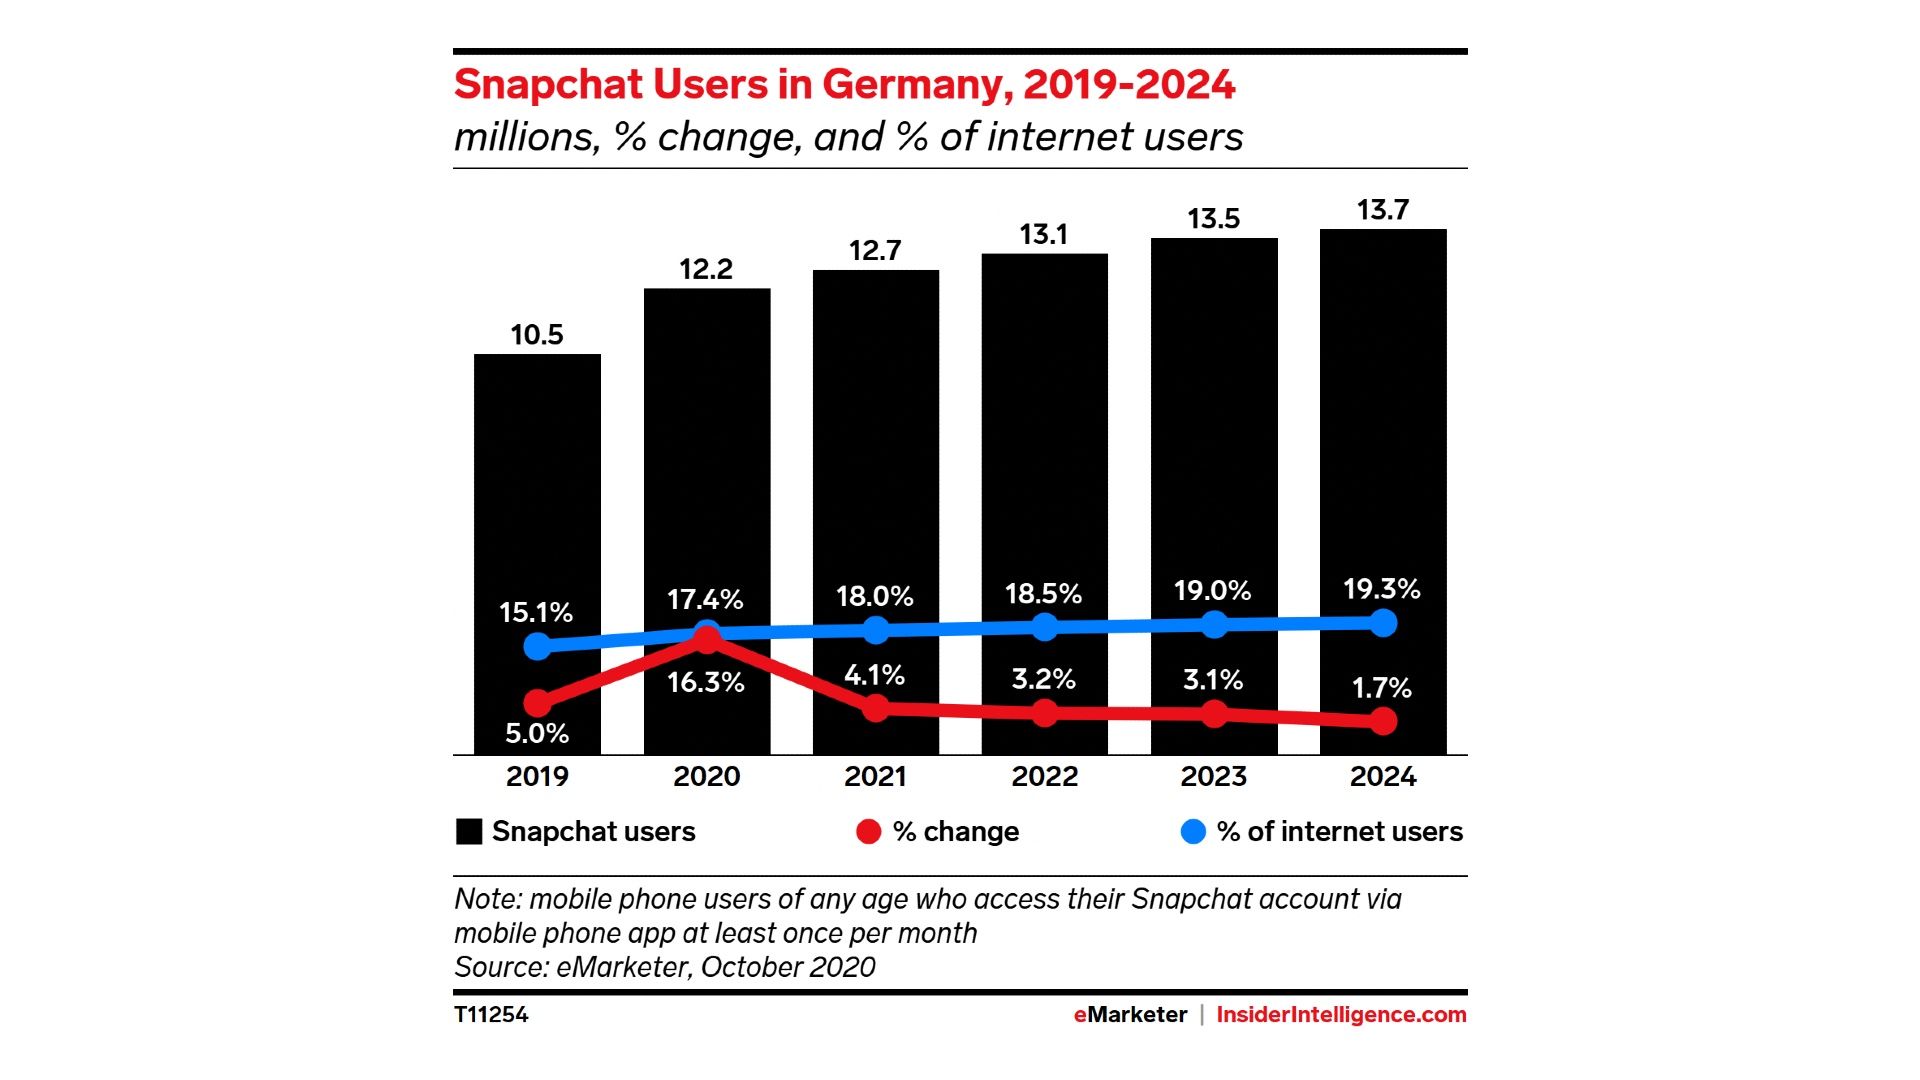 Snapchat user growth to slow down in Western Europe, eMarketer predicts